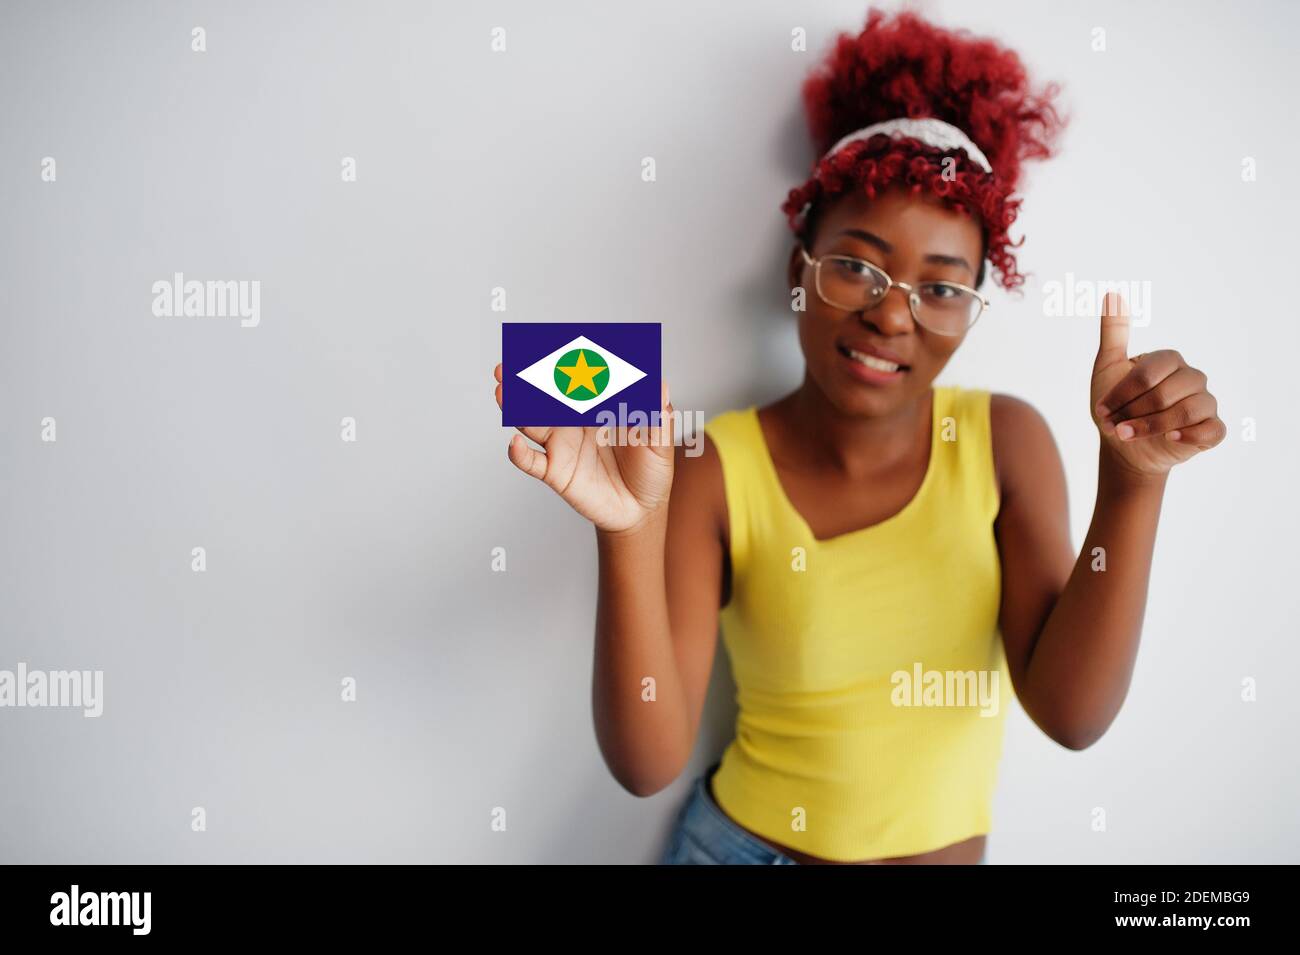 Brazilian woman with afro hair hold Mato Grosso flag isolated on white background, show thumb up. States of Brazil concept. Stock Photo